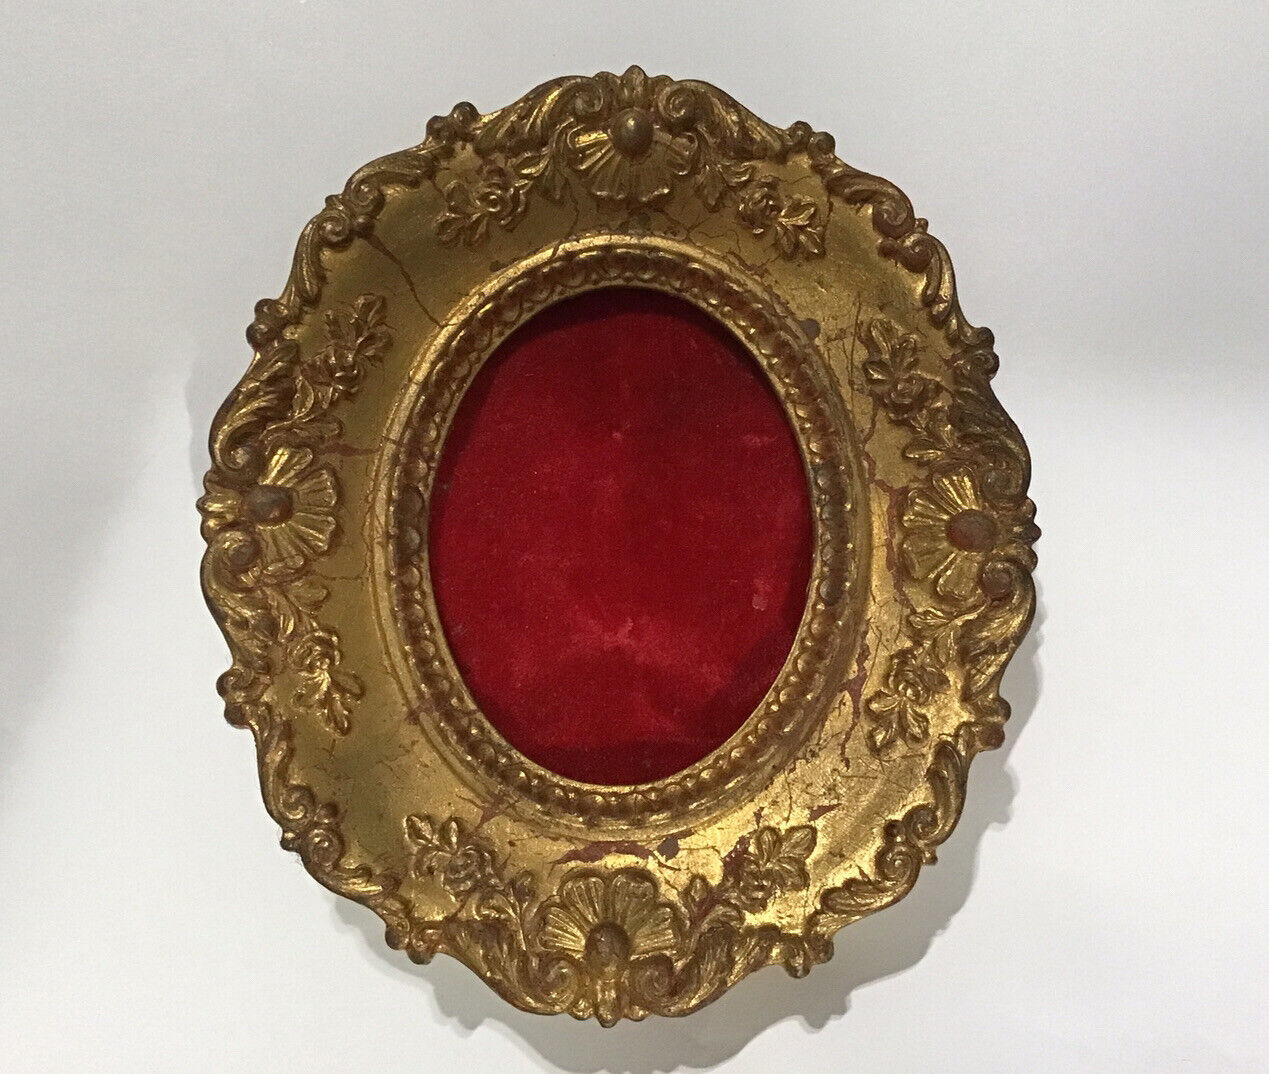 Vintage Oval Picture Frame Ornate Gold Tone Resin Small